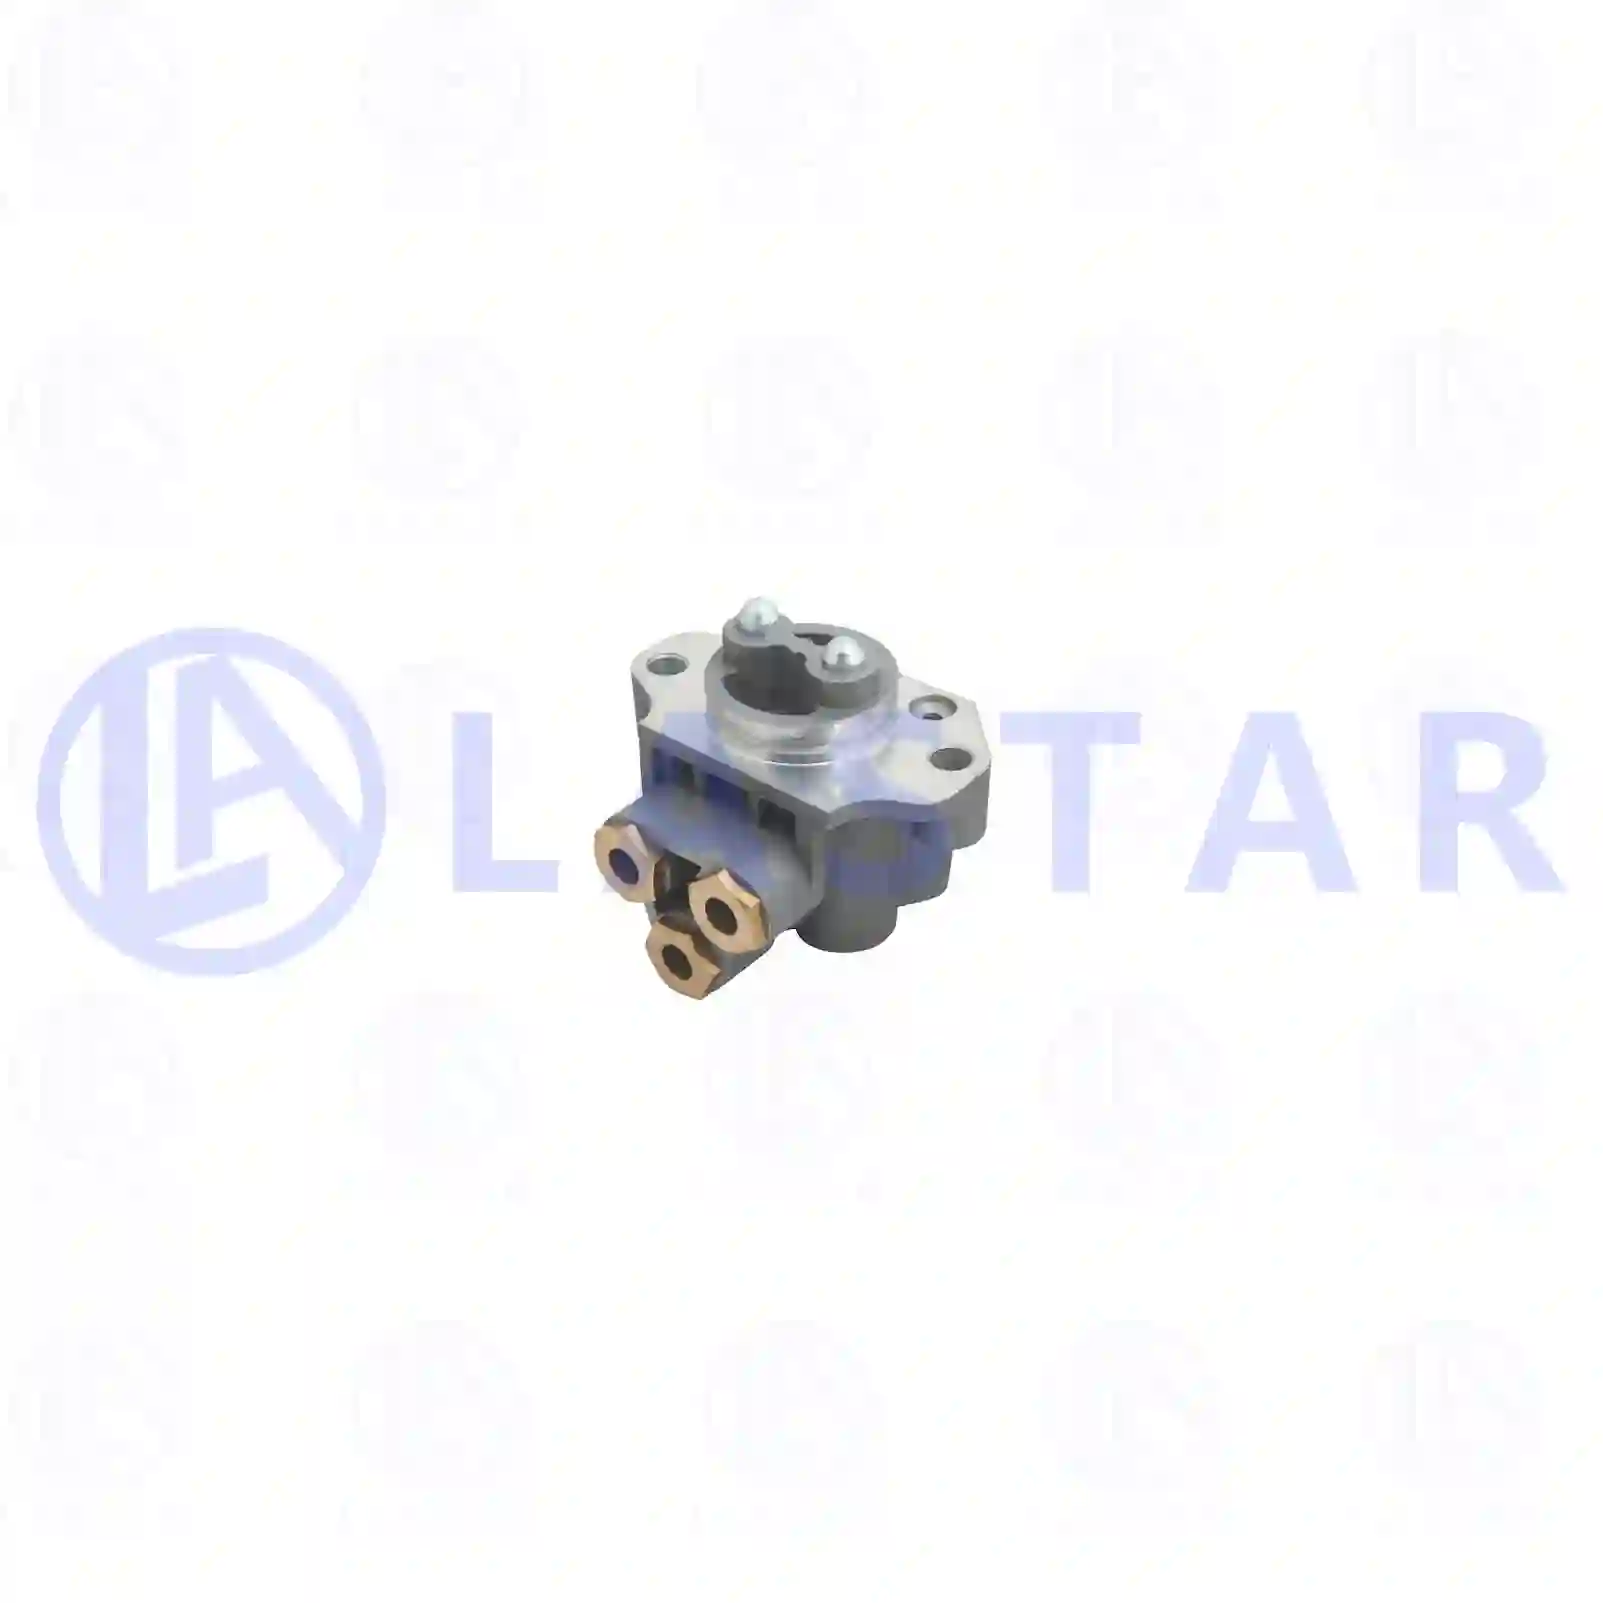  Shut-off valve, with bypass || Lastar Spare Part | Truck Spare Parts, Auotomotive Spare Parts